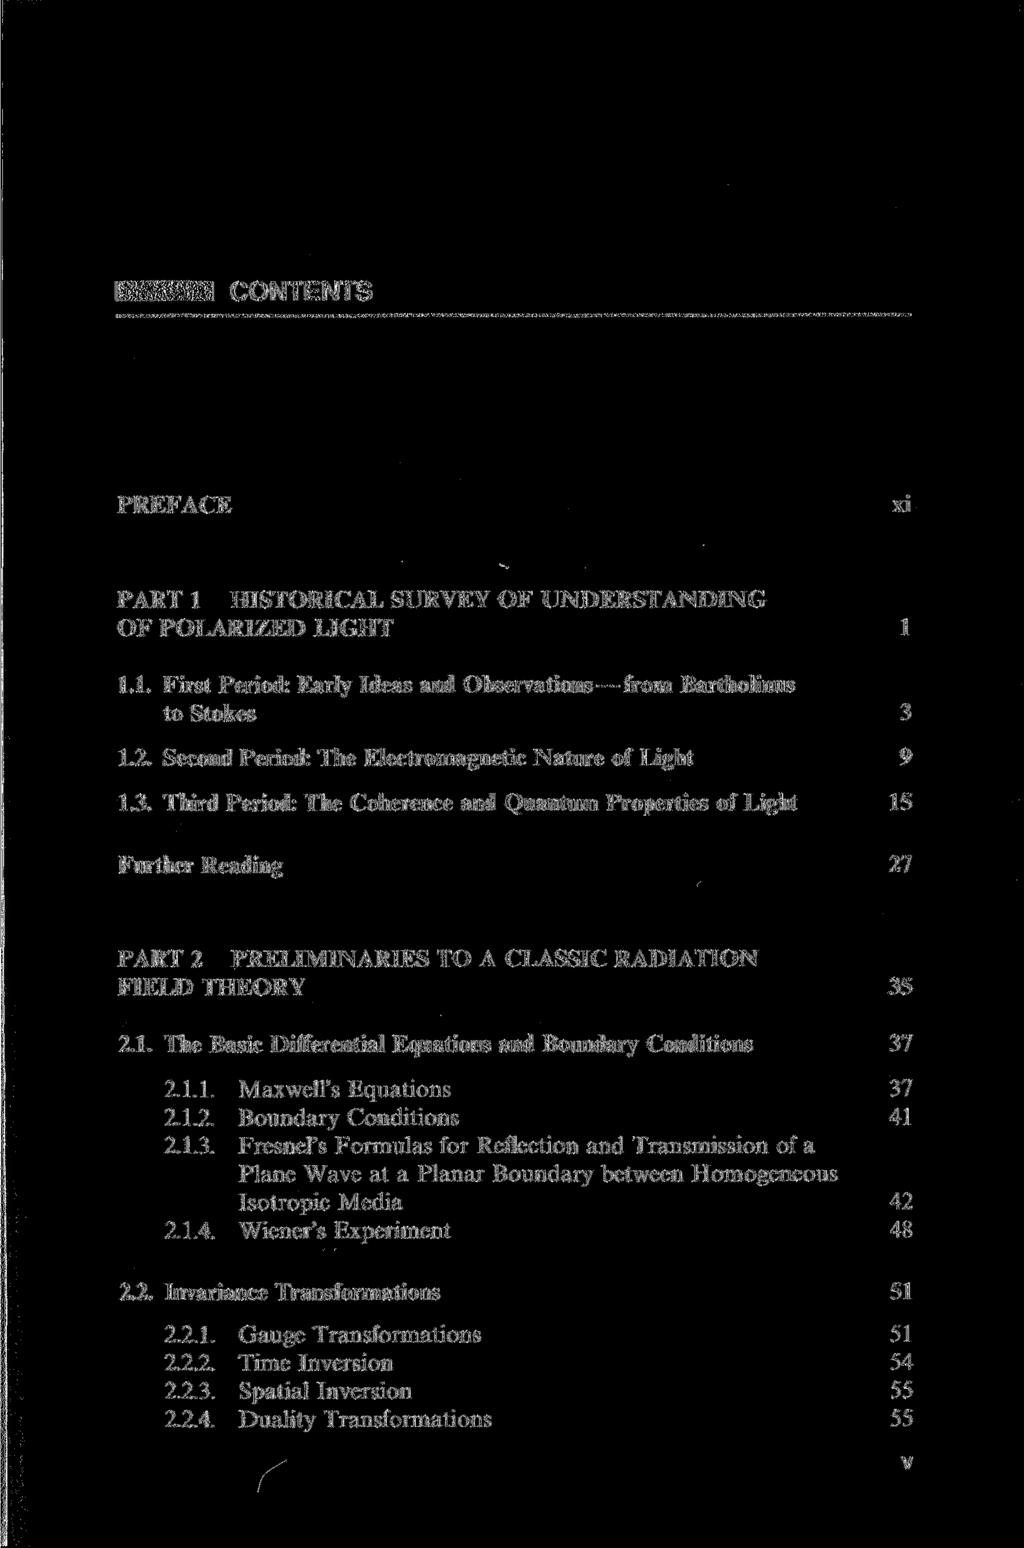 CONTENTS PREFACE xi PART 1 HISTORICAL SURVEY OF UNDERSTANDING OF POLARIZED LIGHT 1 1.1. First Period: Early Ideas and Observations from Bartholinus to Stokes 3 1.2.